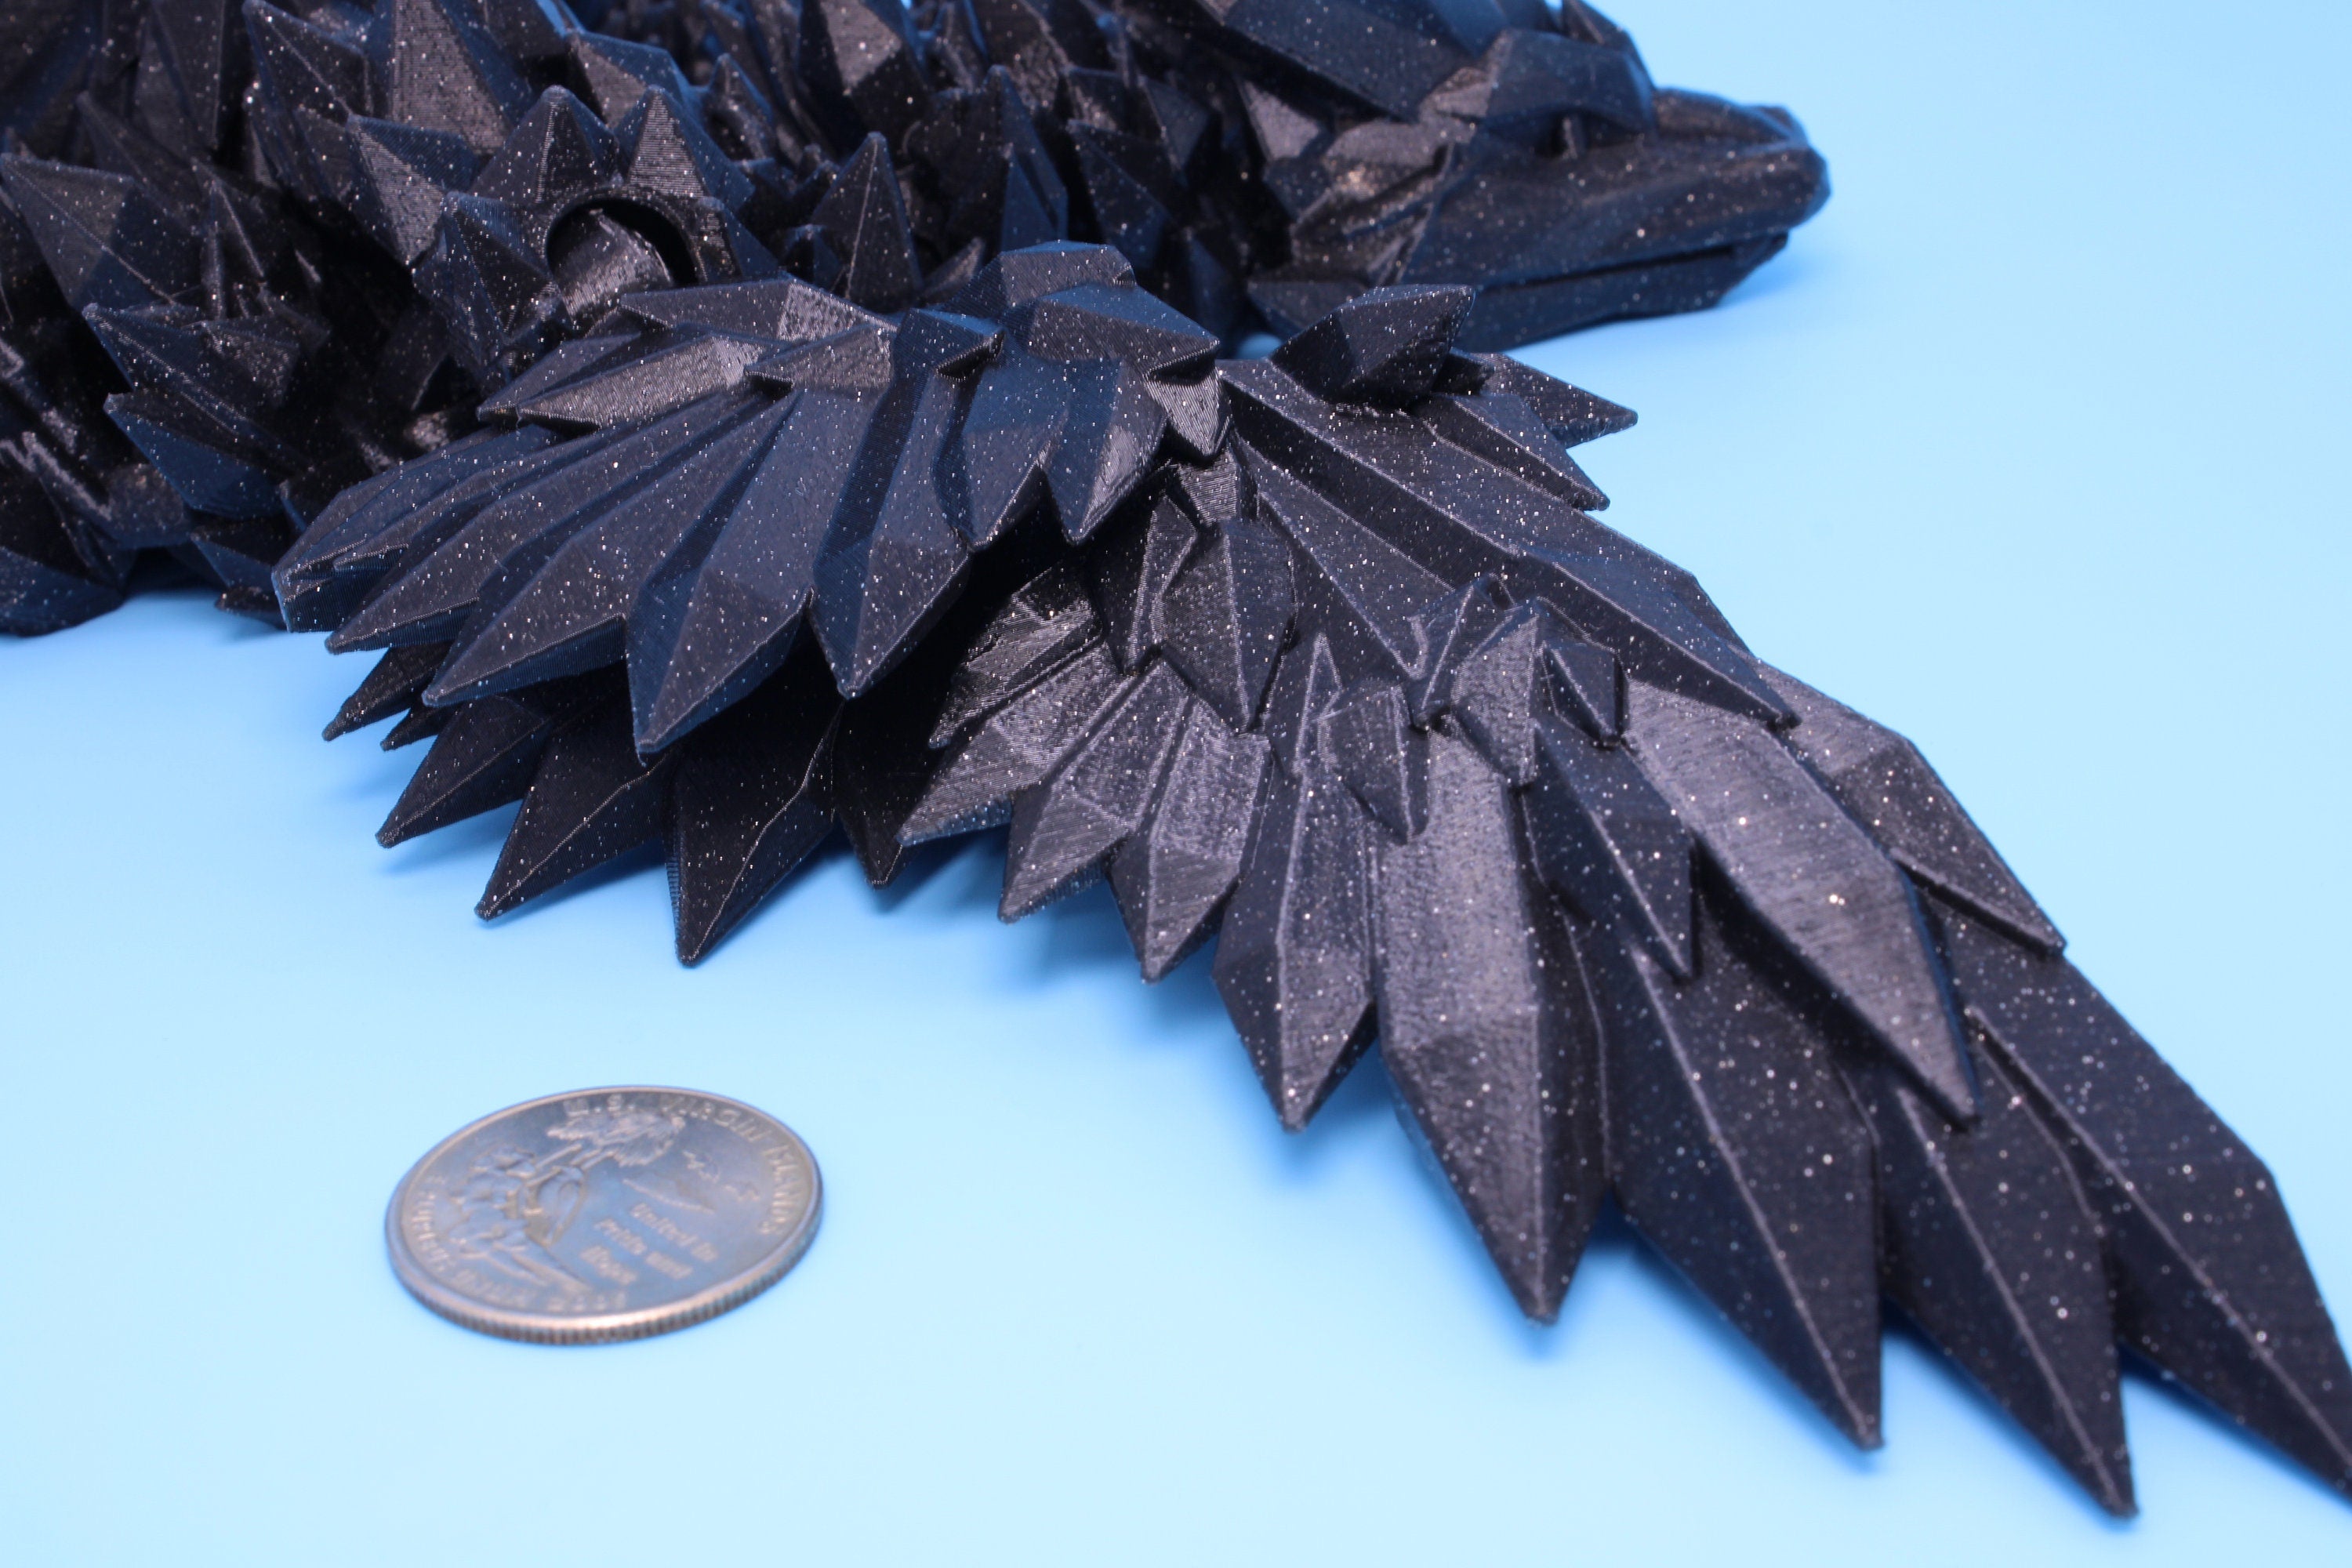 Crystal Wing Dragon- Black with Sparkles | 3D printed | 18 in. | Articulating Dragon | Flexi Toy.